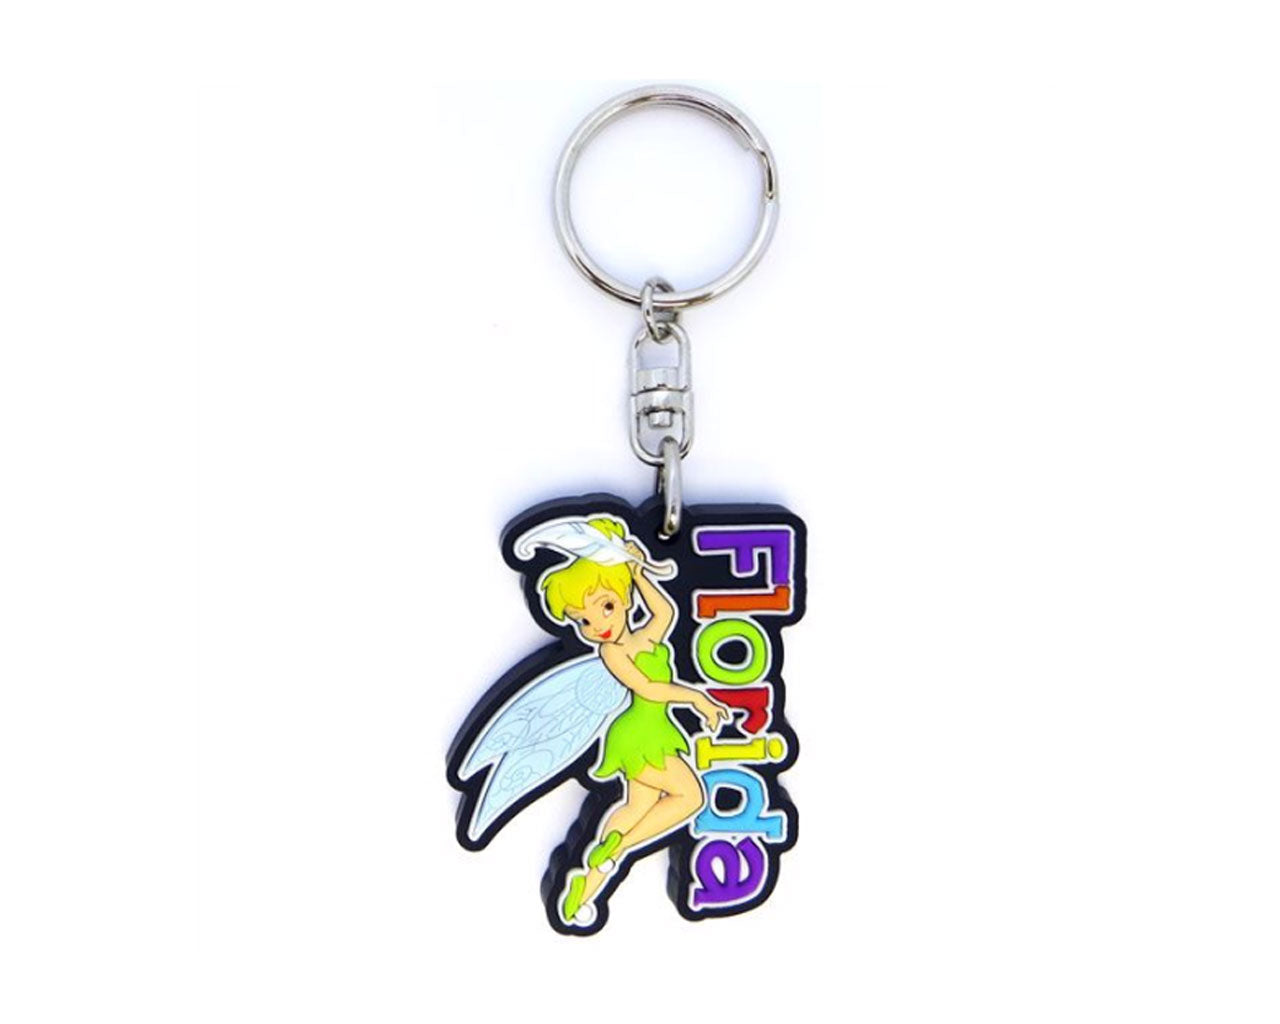 Disney Tinker Bell with Florida Font Multicolor Rubber Key Chain - Travel Souvenir Gift